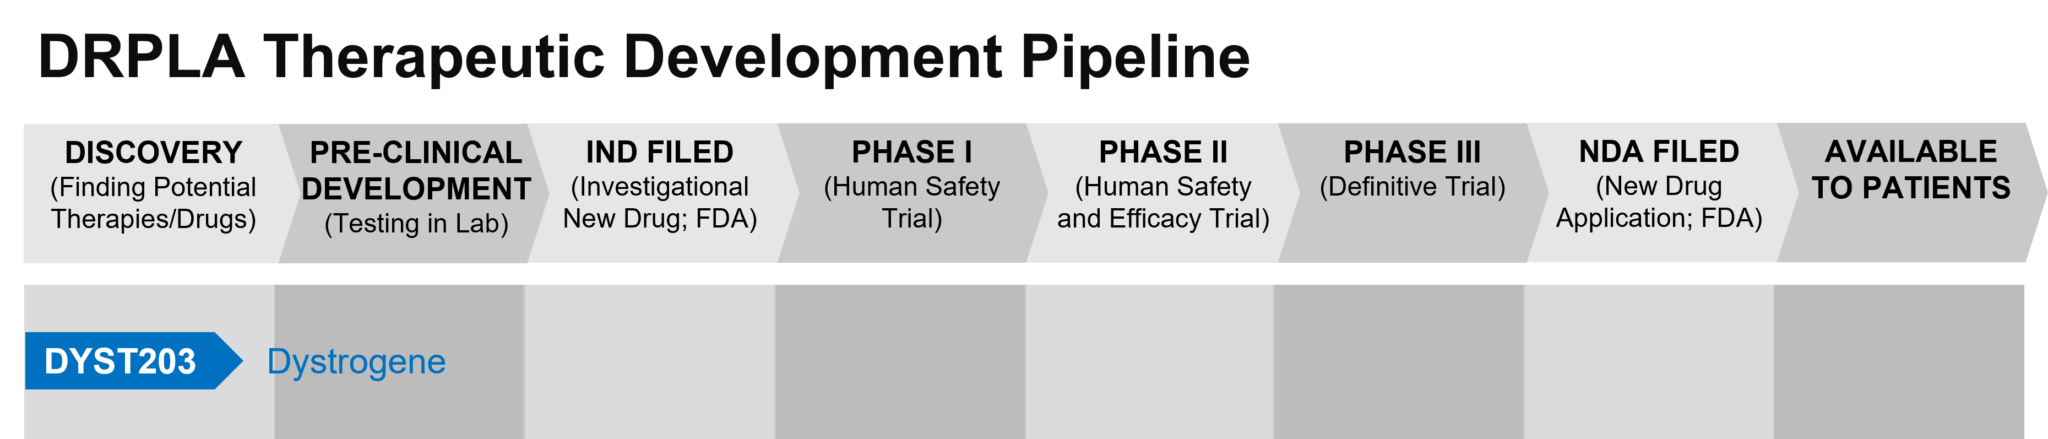 Graph depicting the phase of drug development for various drugs to treat DRPLA